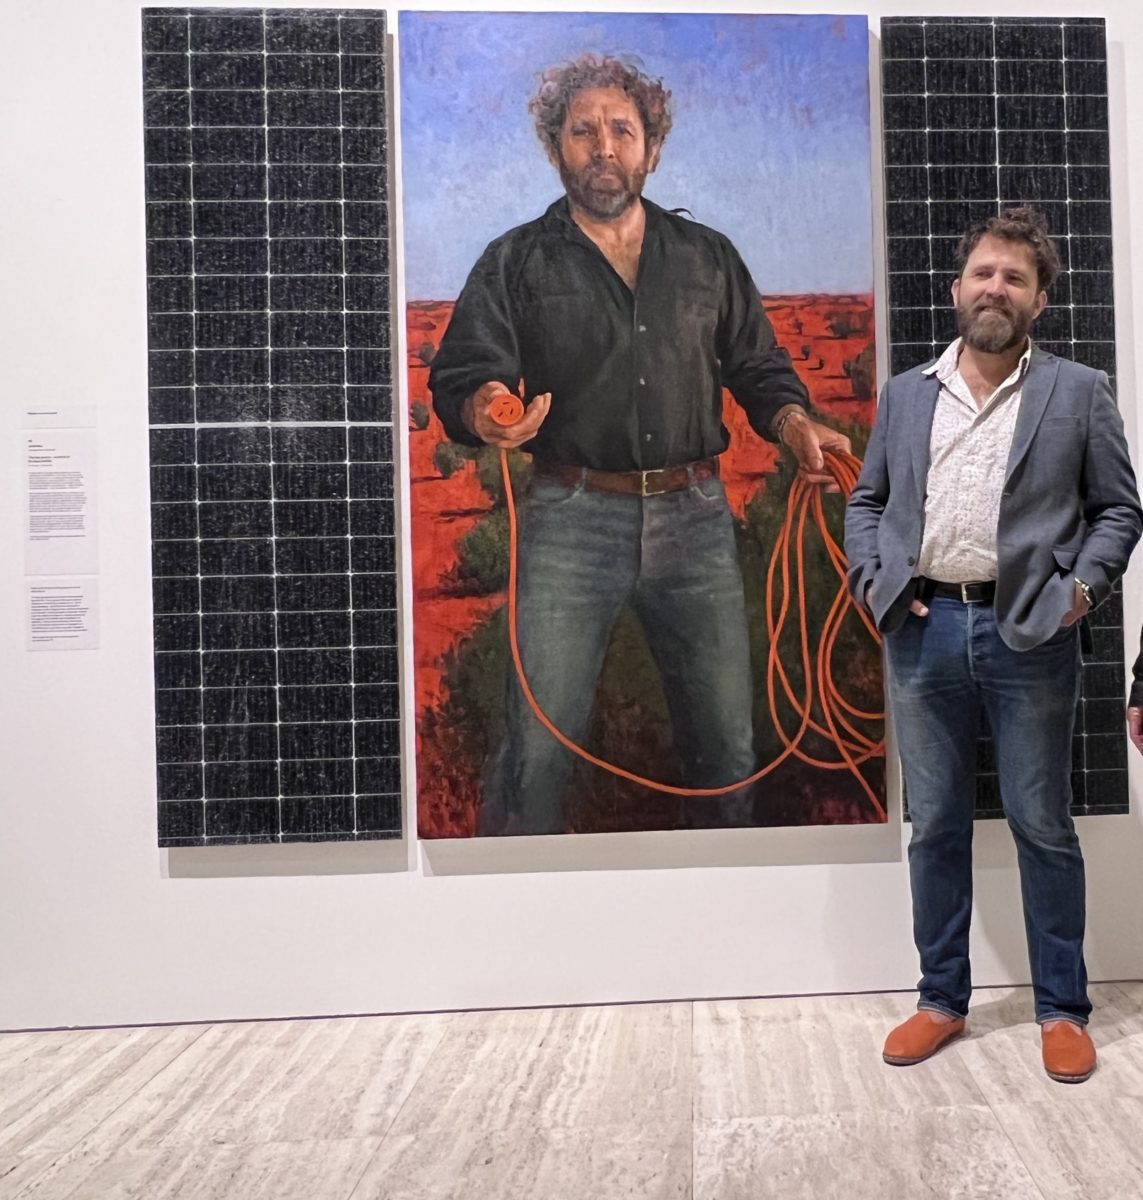 Solar panel portrait of Saul Griffith named finalist in 2022 Archibald Prize